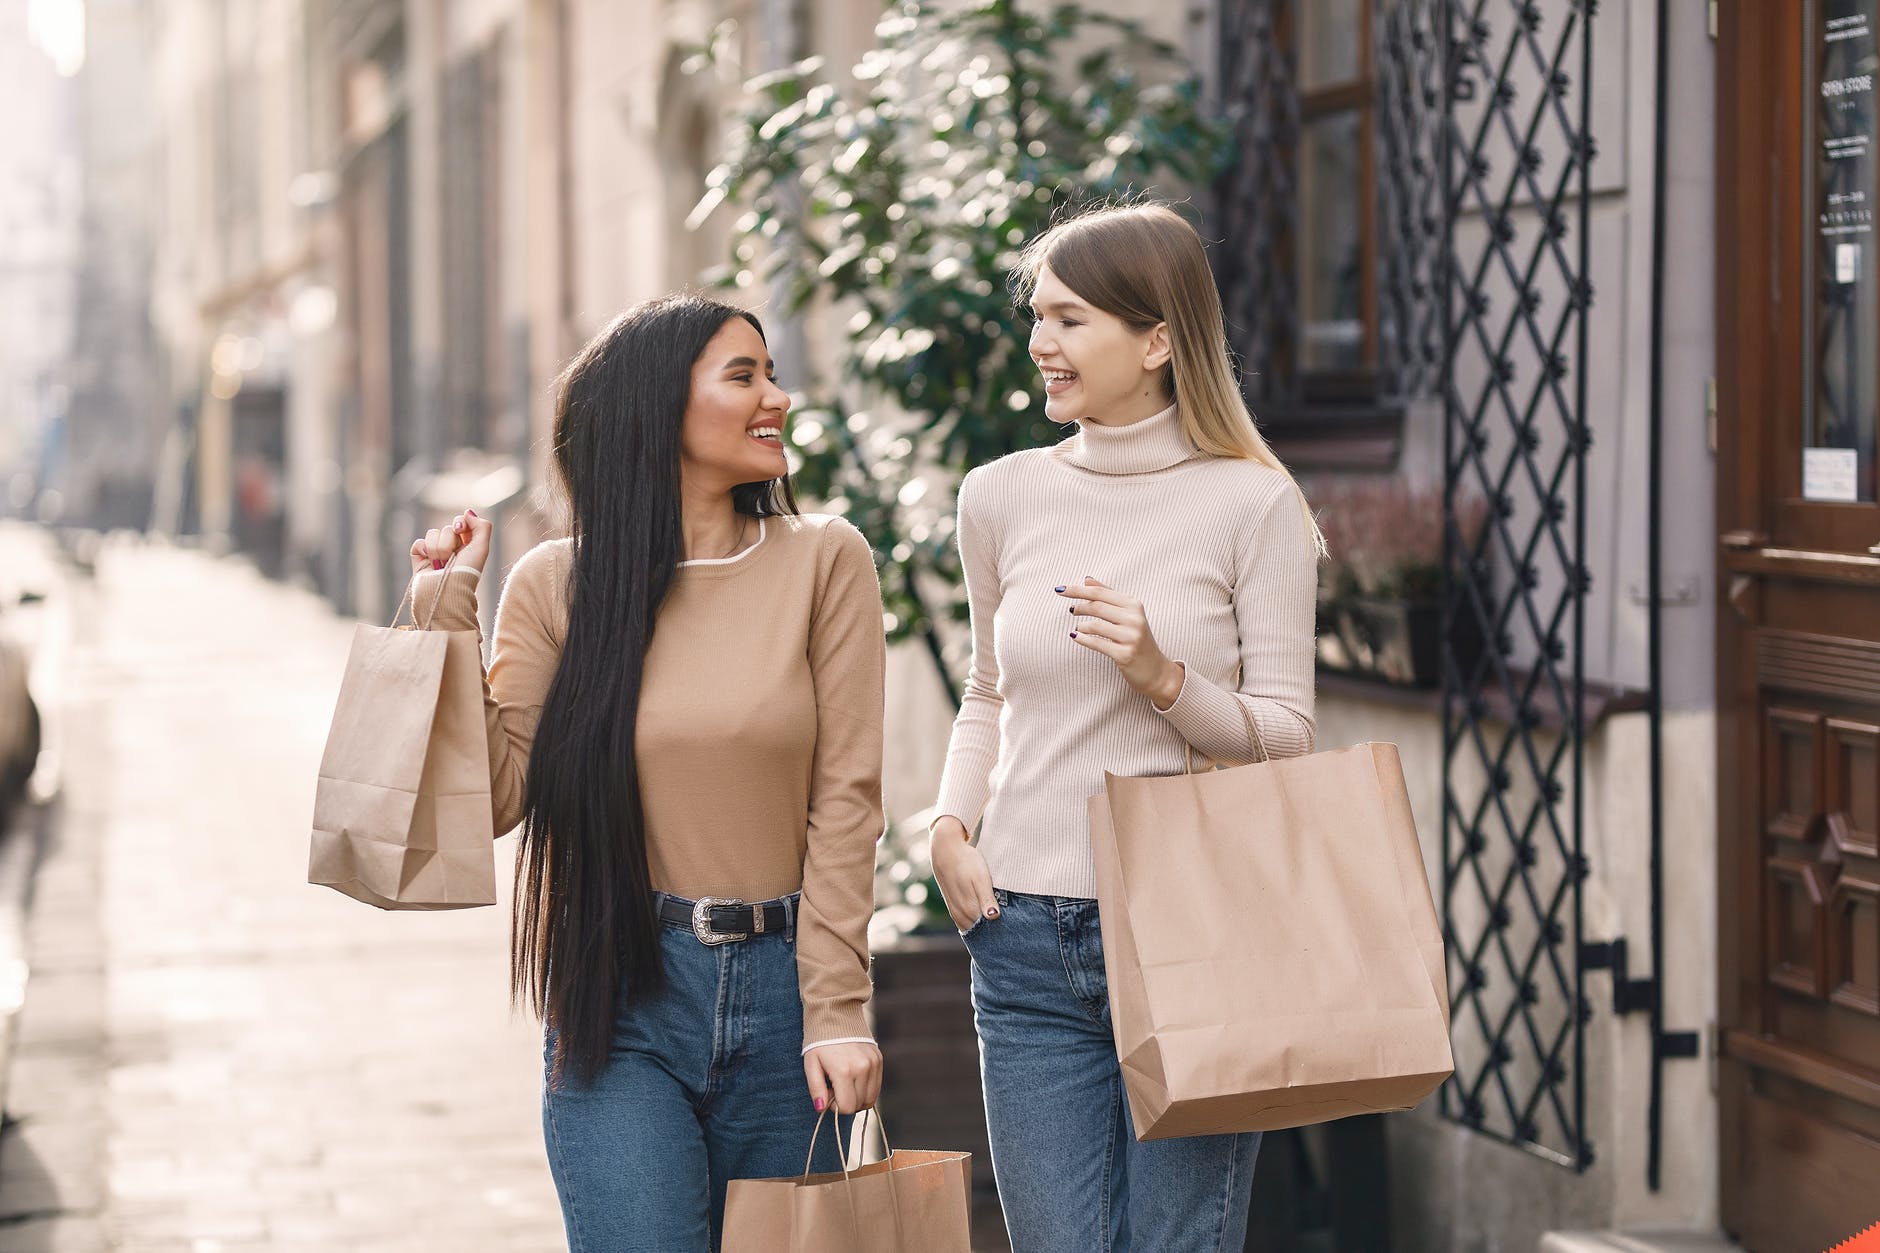 cheerful friends carrying shopping bags and smiling